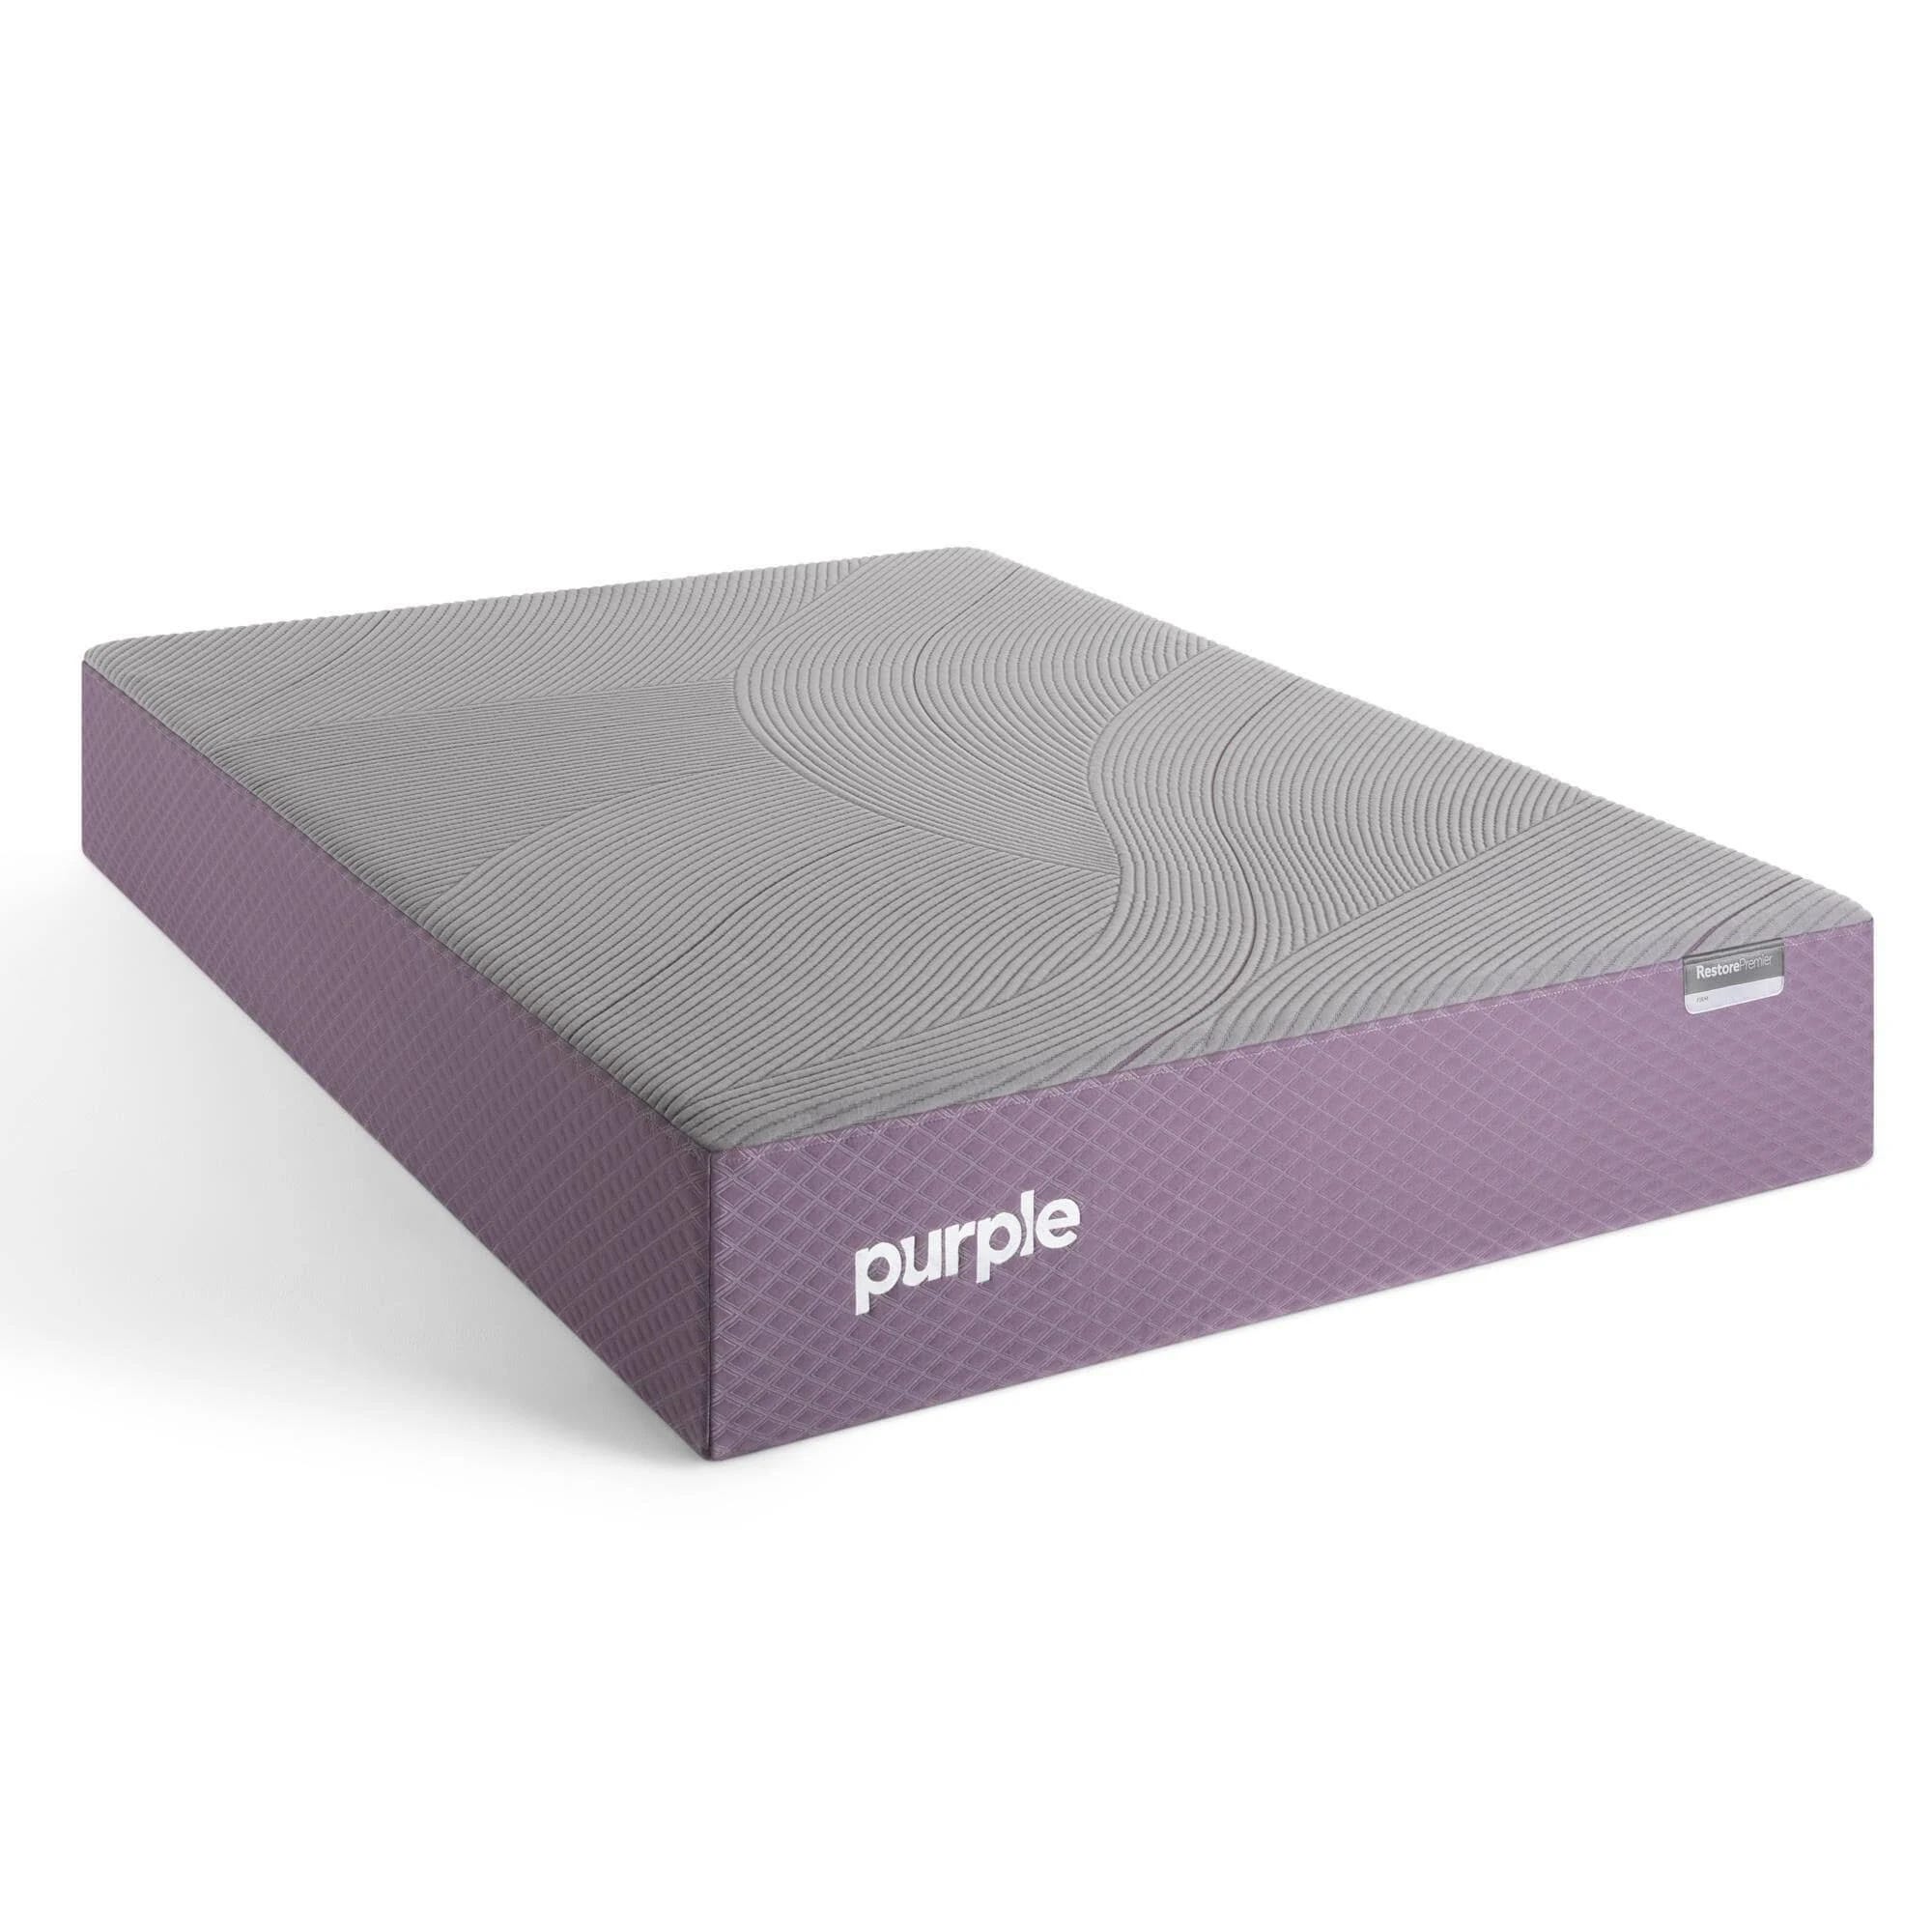 Purple Restore Premier Firm Hybrid Mattress with GelFlex Grid for Comfort and Support | Image